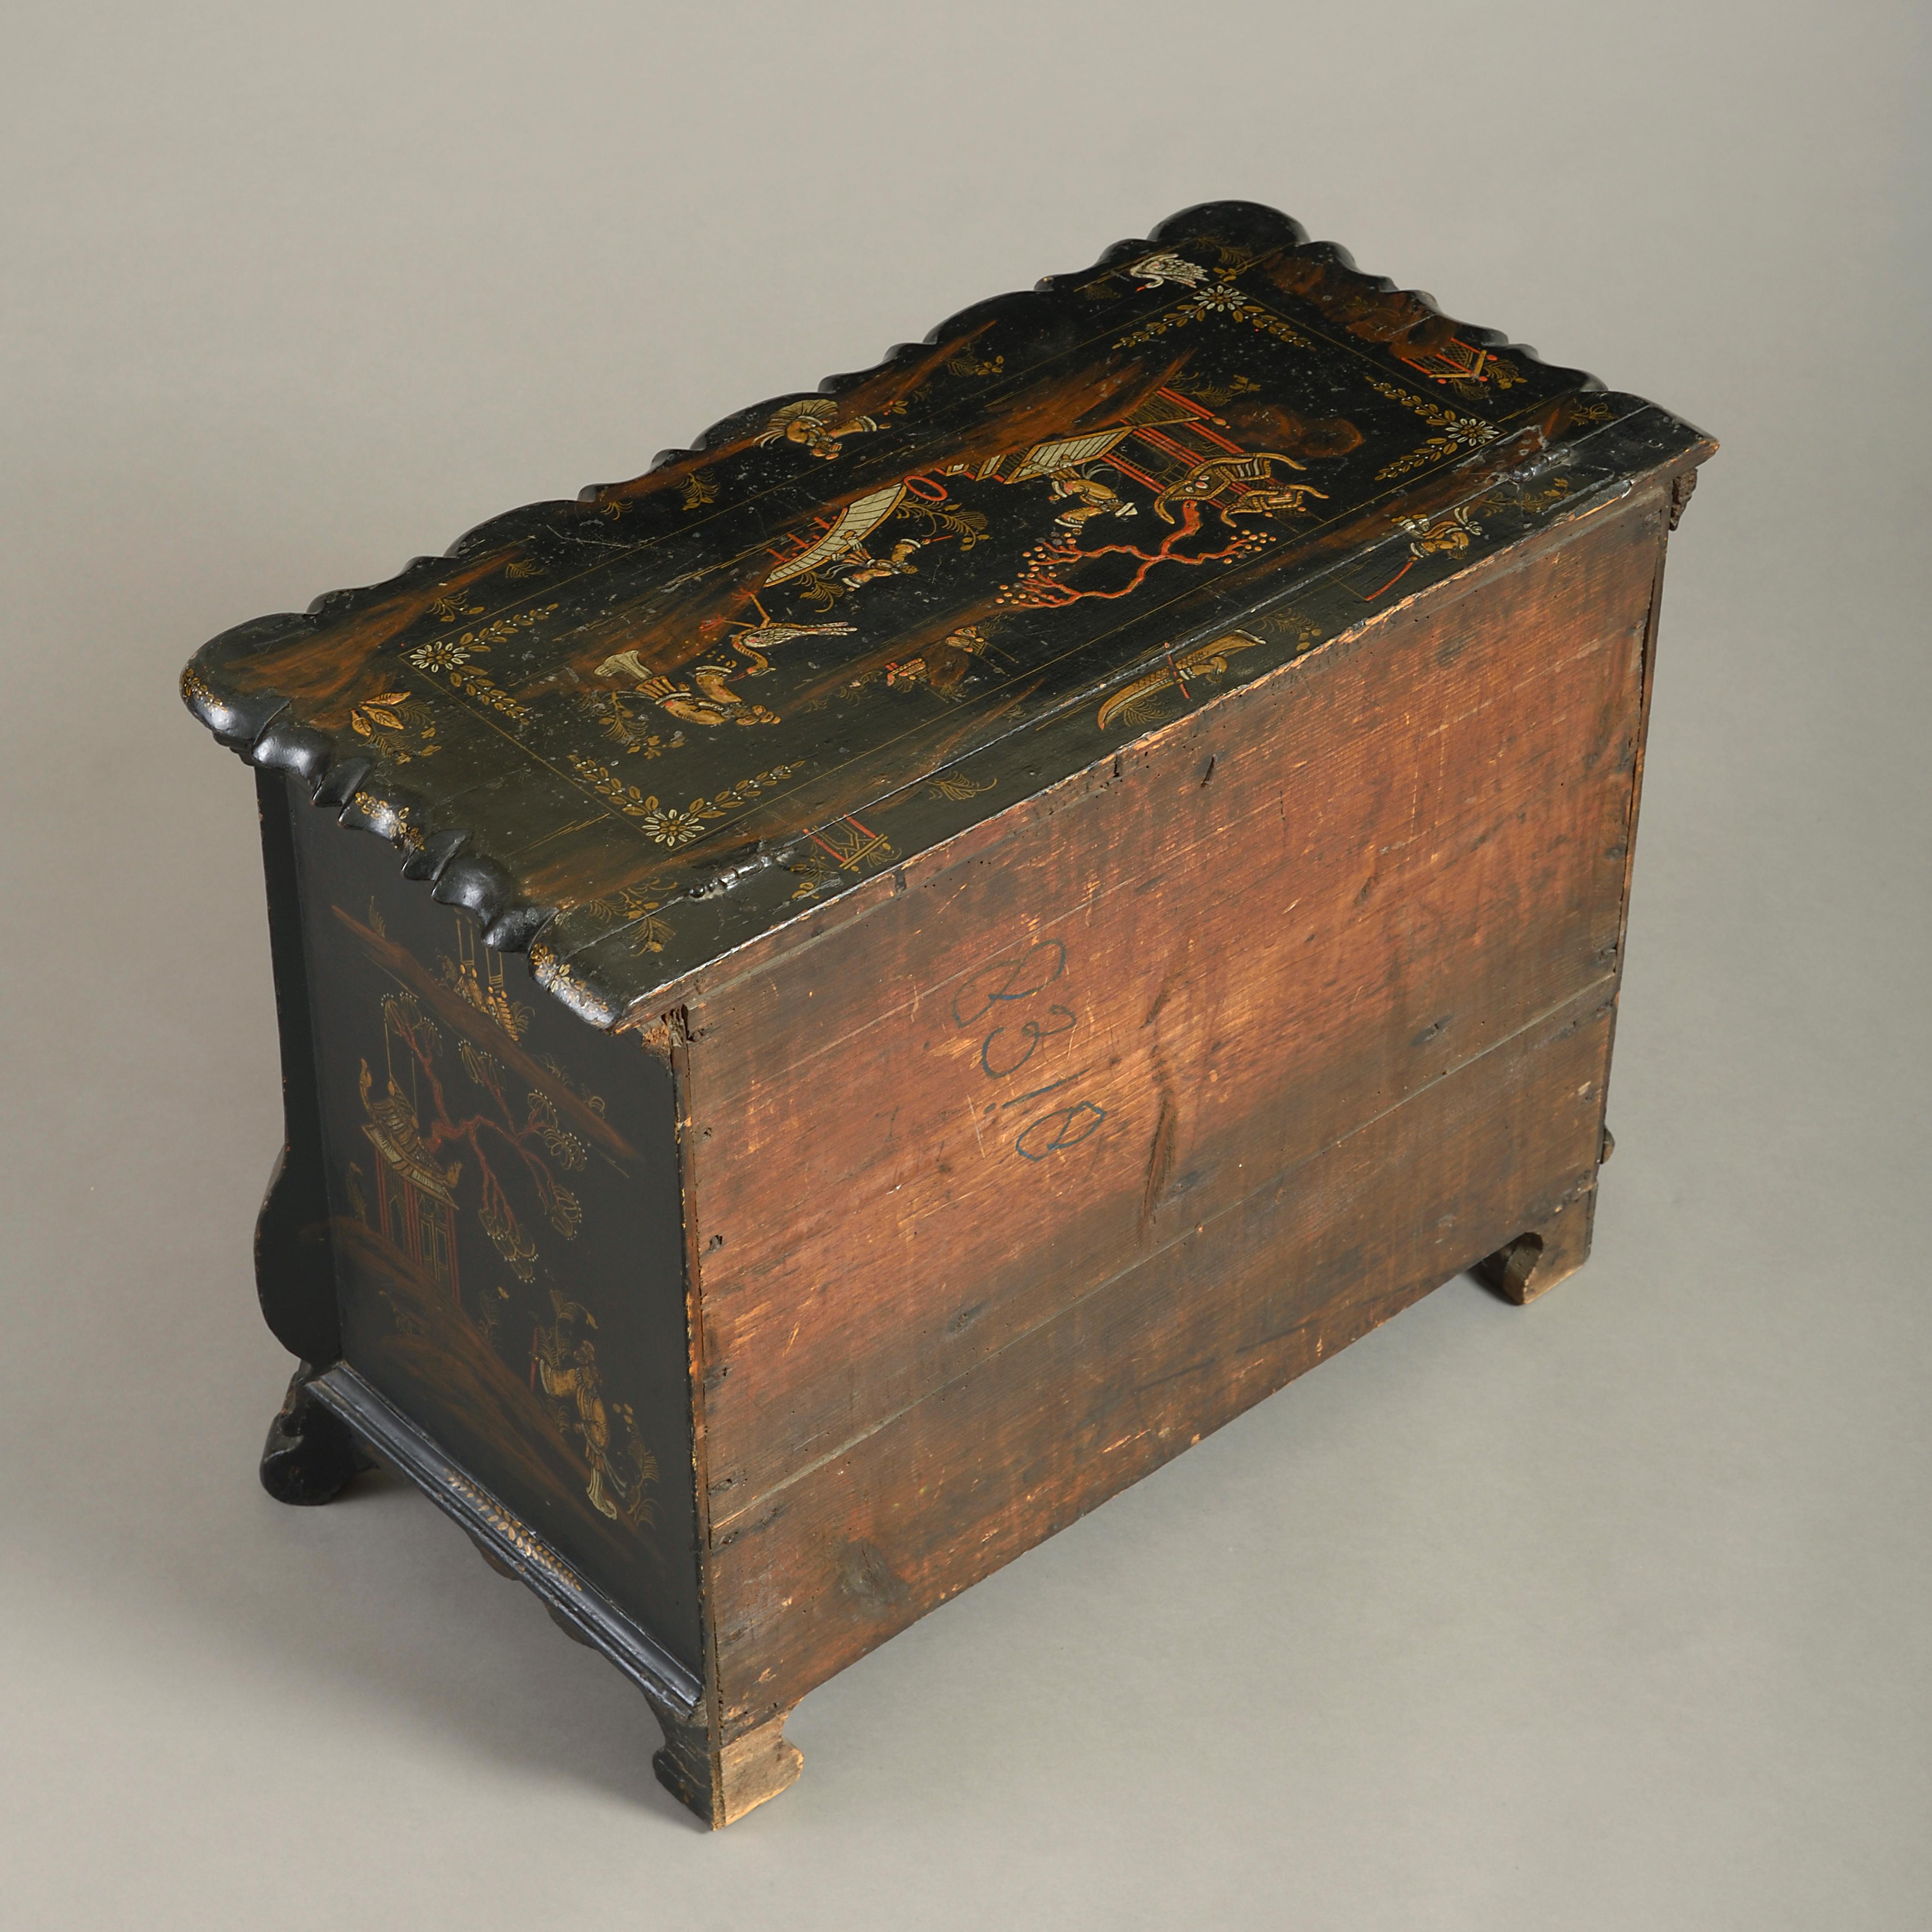 Gold Leaf Mid-18th Century Chinoiserie Black Japanned Work Box